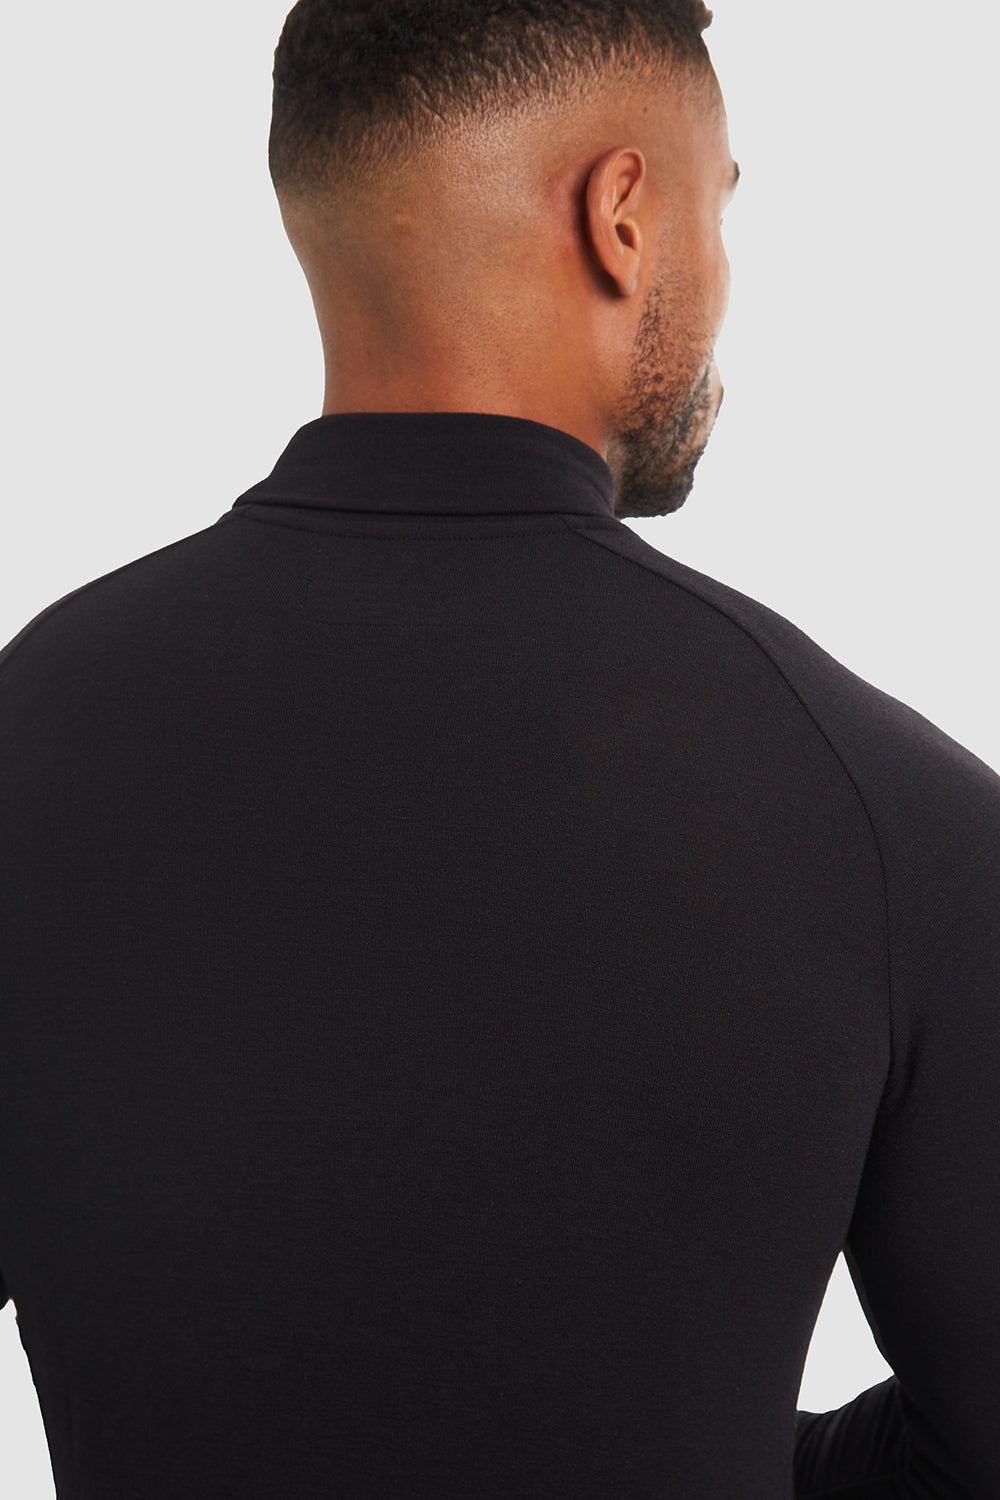 Neck in Look - Jersey Black (LS) Roll ATHLETE USA TAILORED Knit -